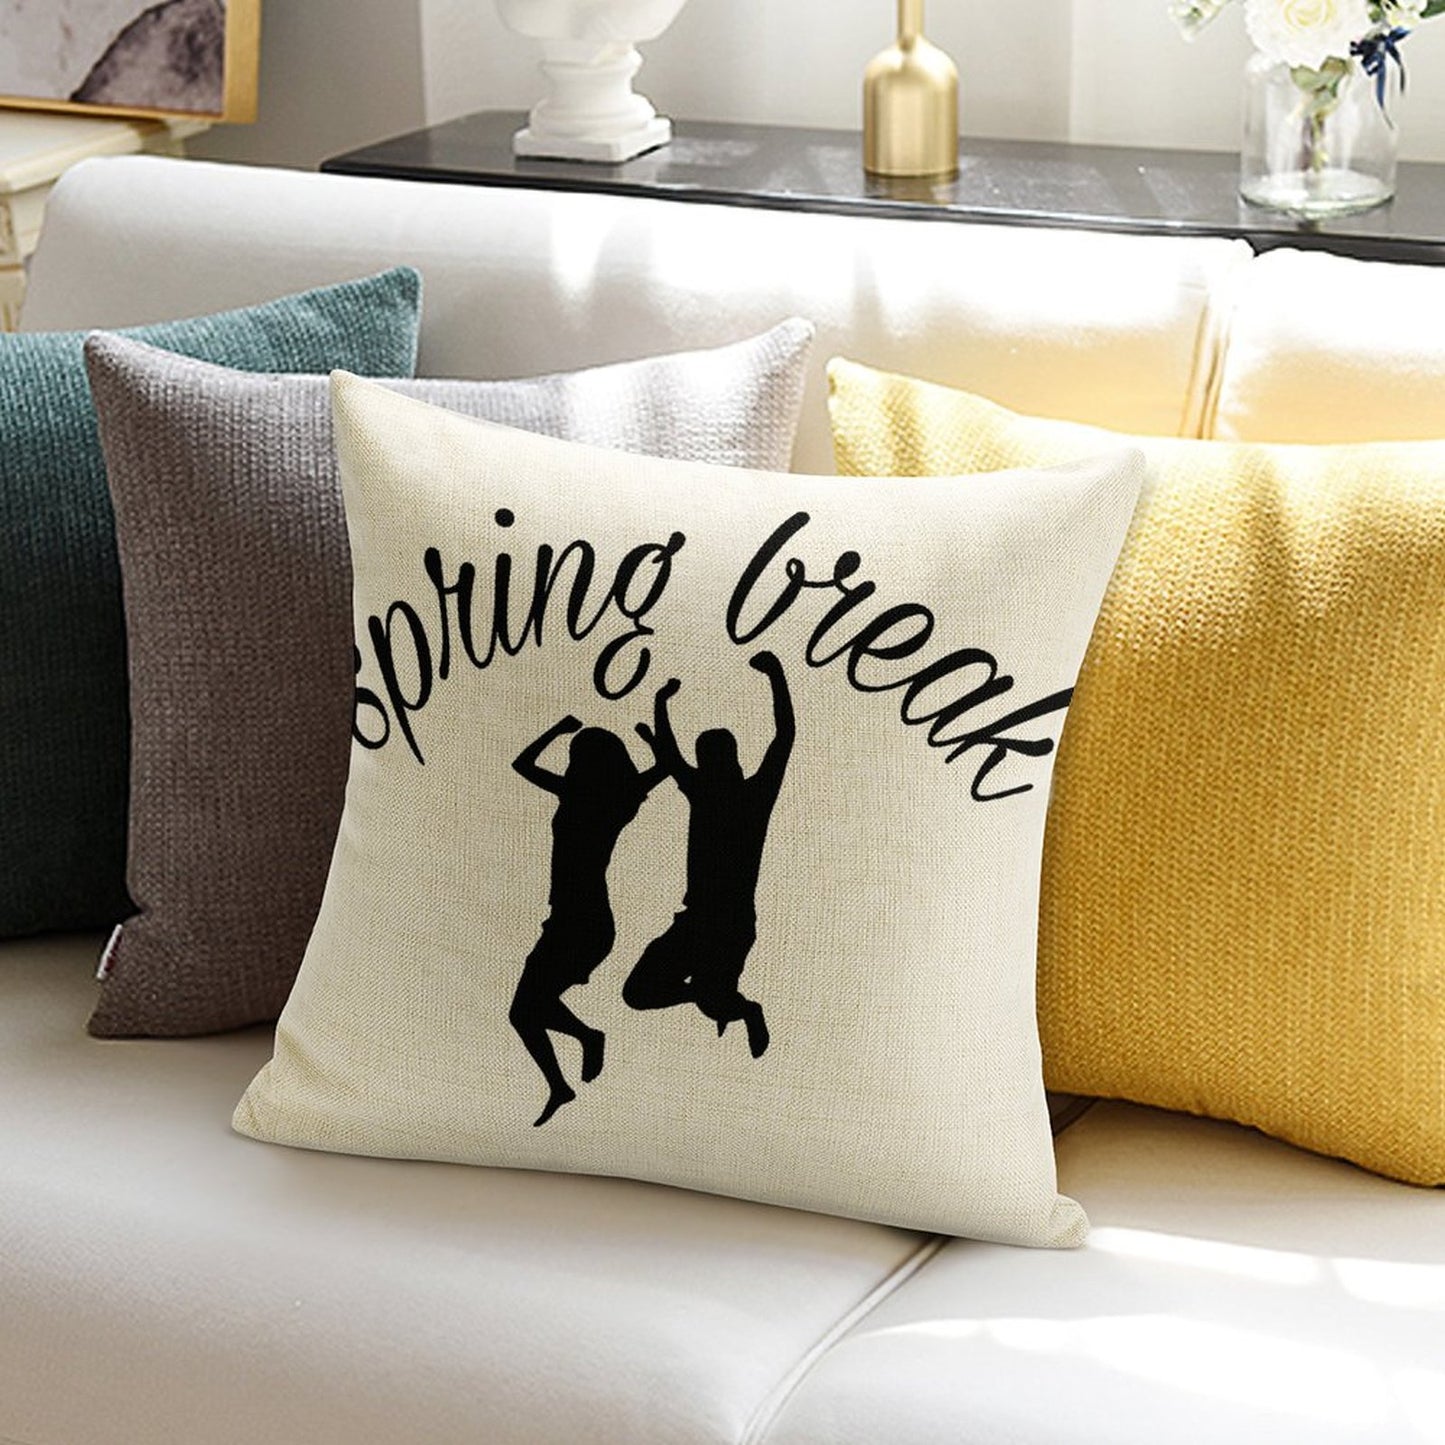 Online Custom Cotton Linen Pillow Case Holiday Happy Spring Outing 18"×18" Only Pillowcase